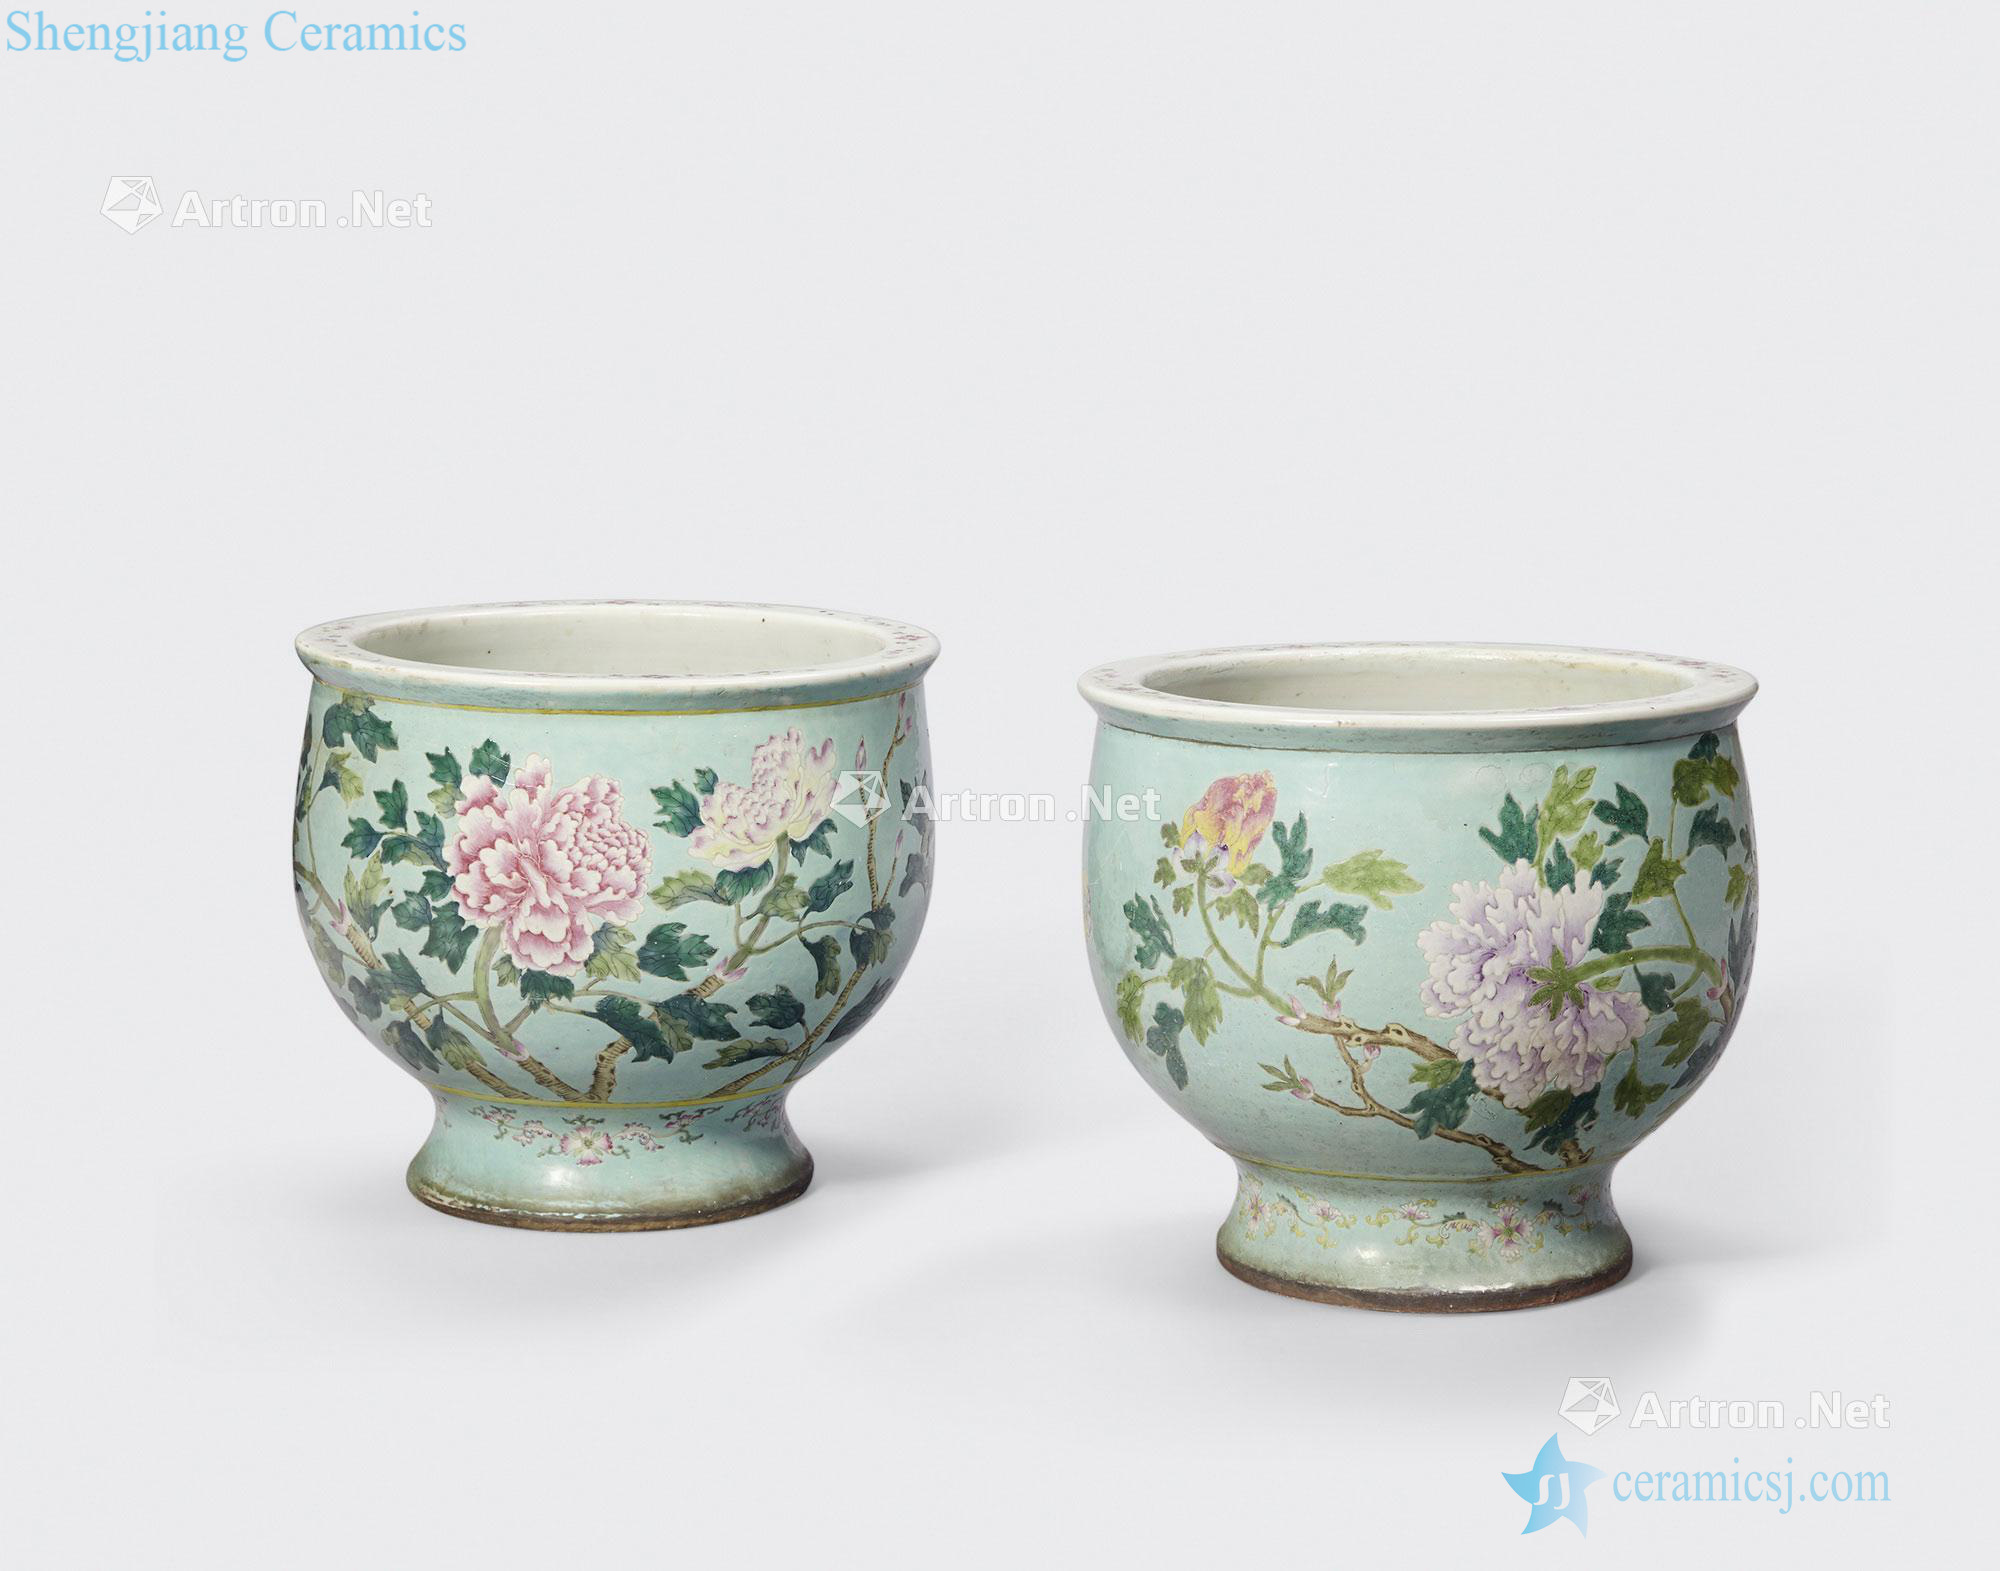 Newest the Qing/Republic period A PAIR OF TURQUOISE GROUND PLANTERS WITH FAMILLE ROSE ENAMEL DECORATION